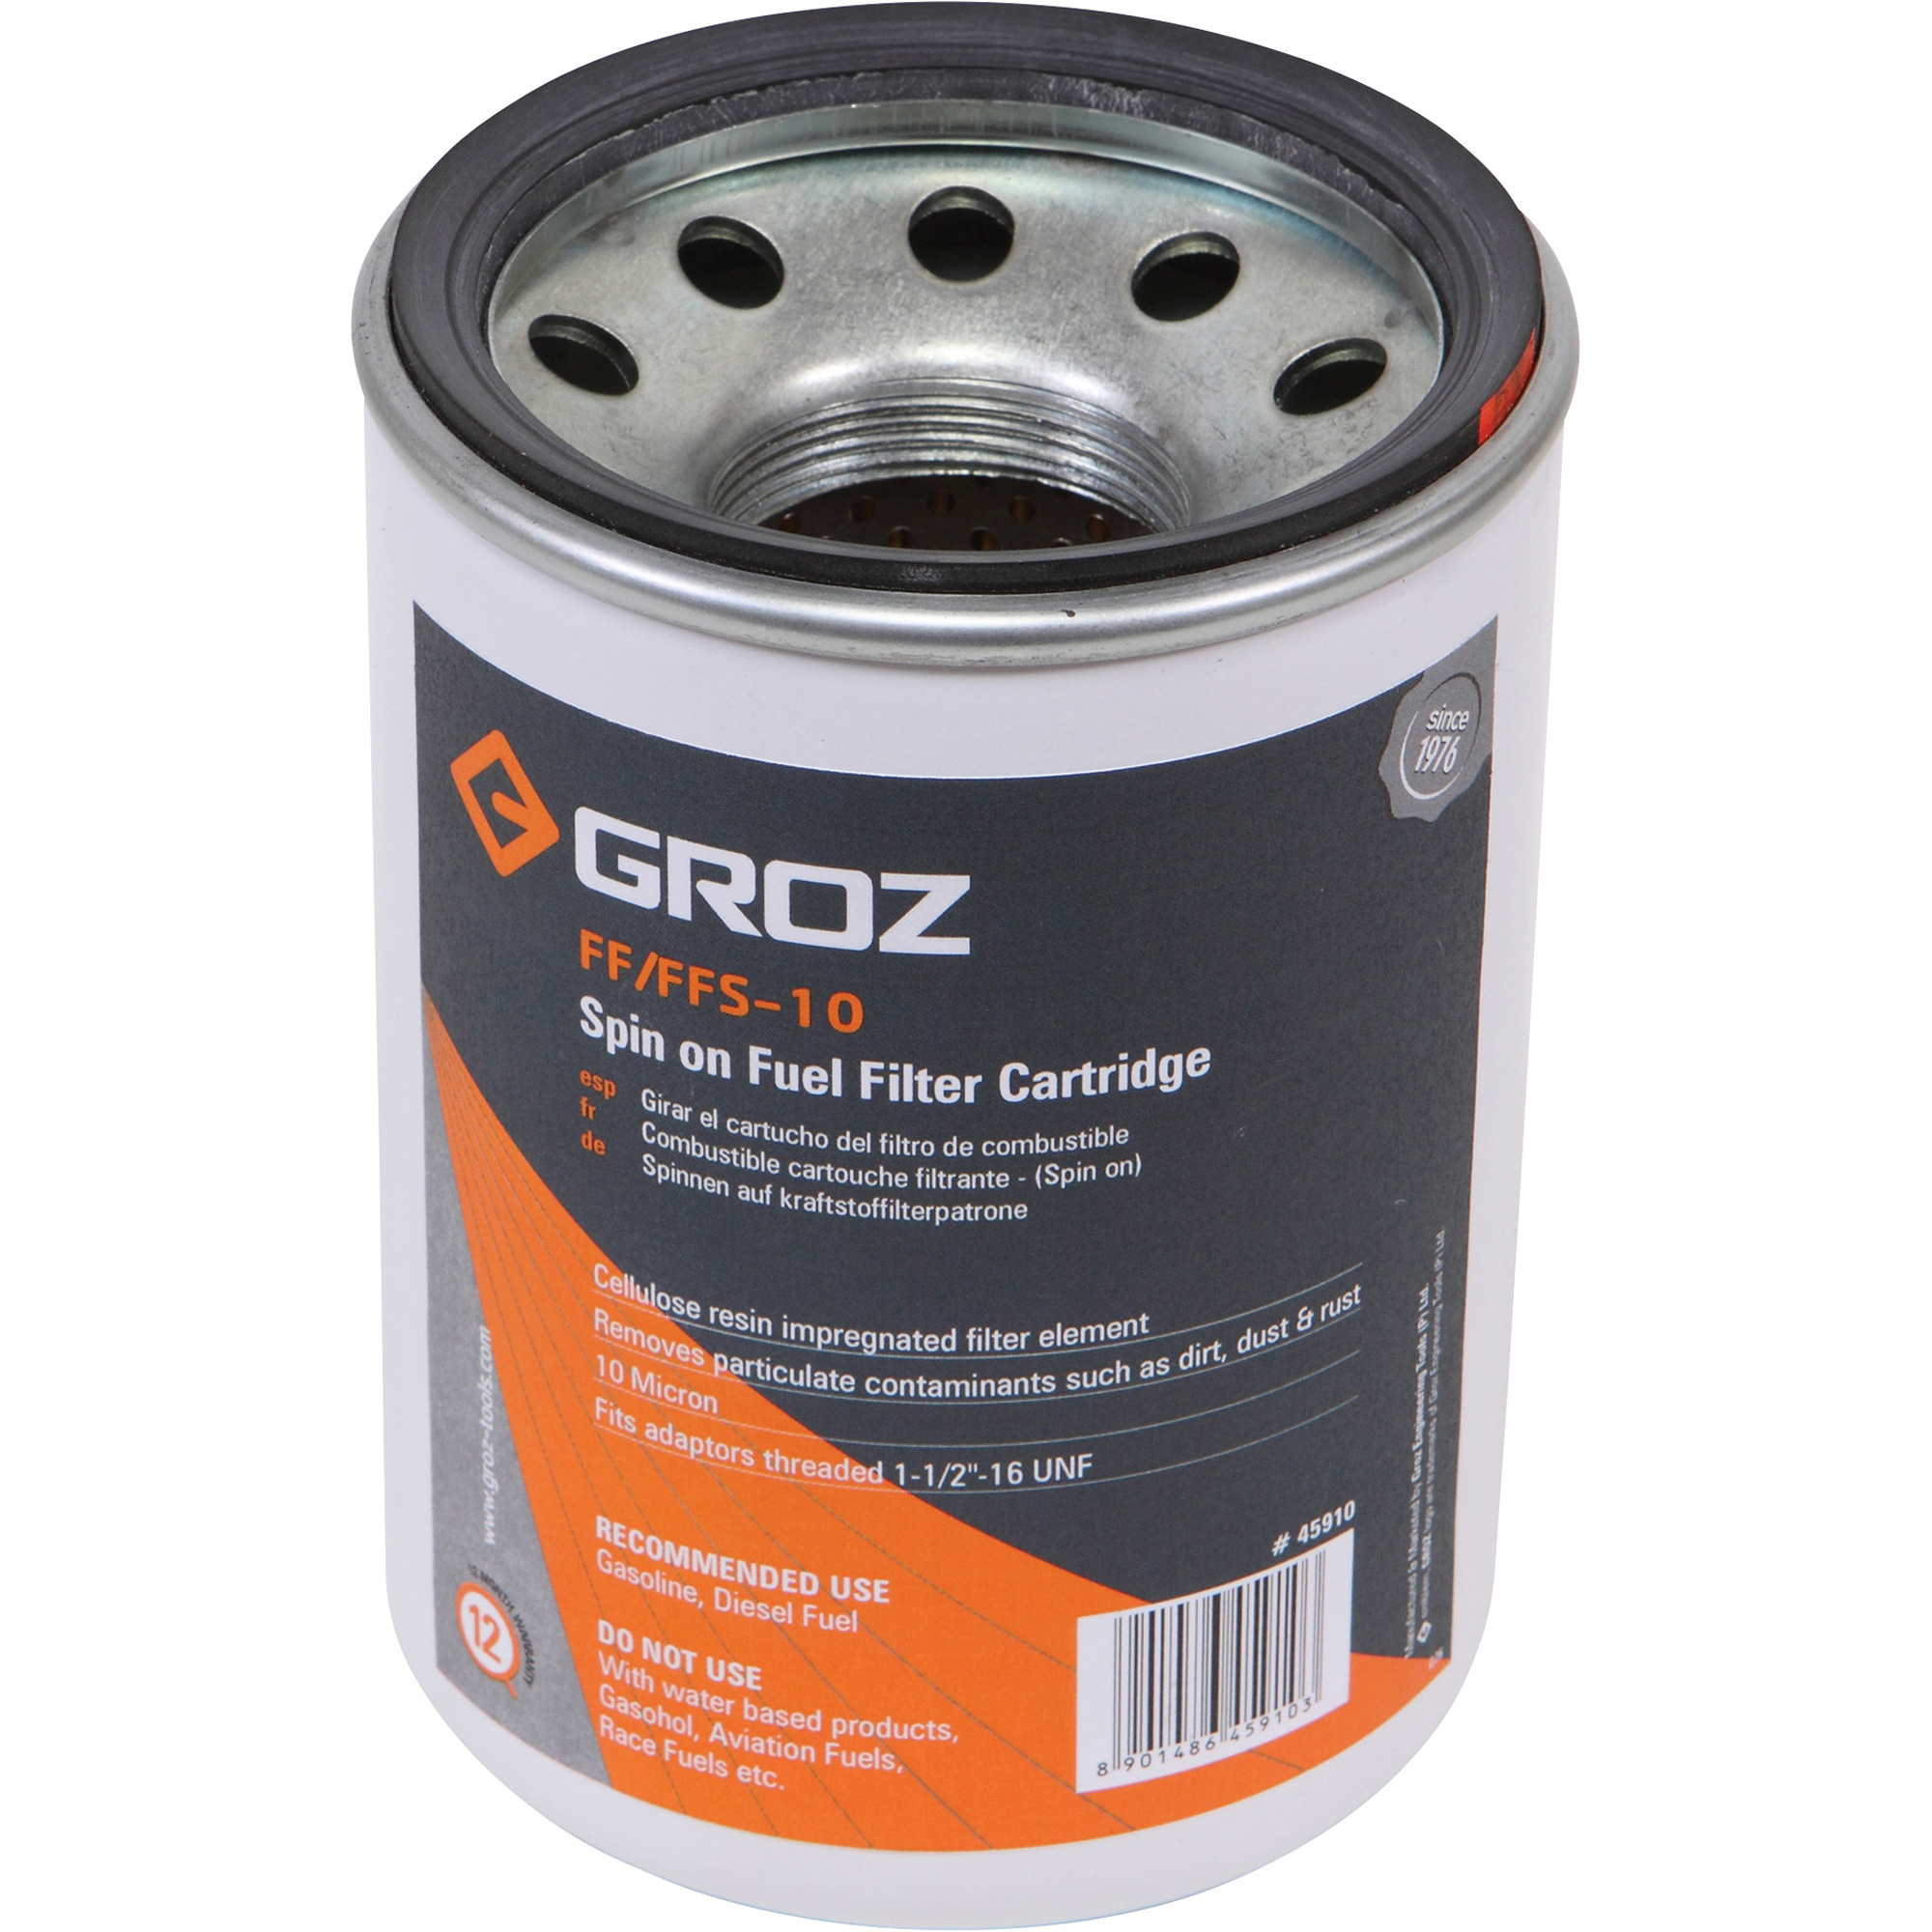 GROZ Spin On Fuel Filter Replacement Cartridge, 10 Micron, 1 1/2Inch-16 UNF Thread, Model FF/FFS/10-WB